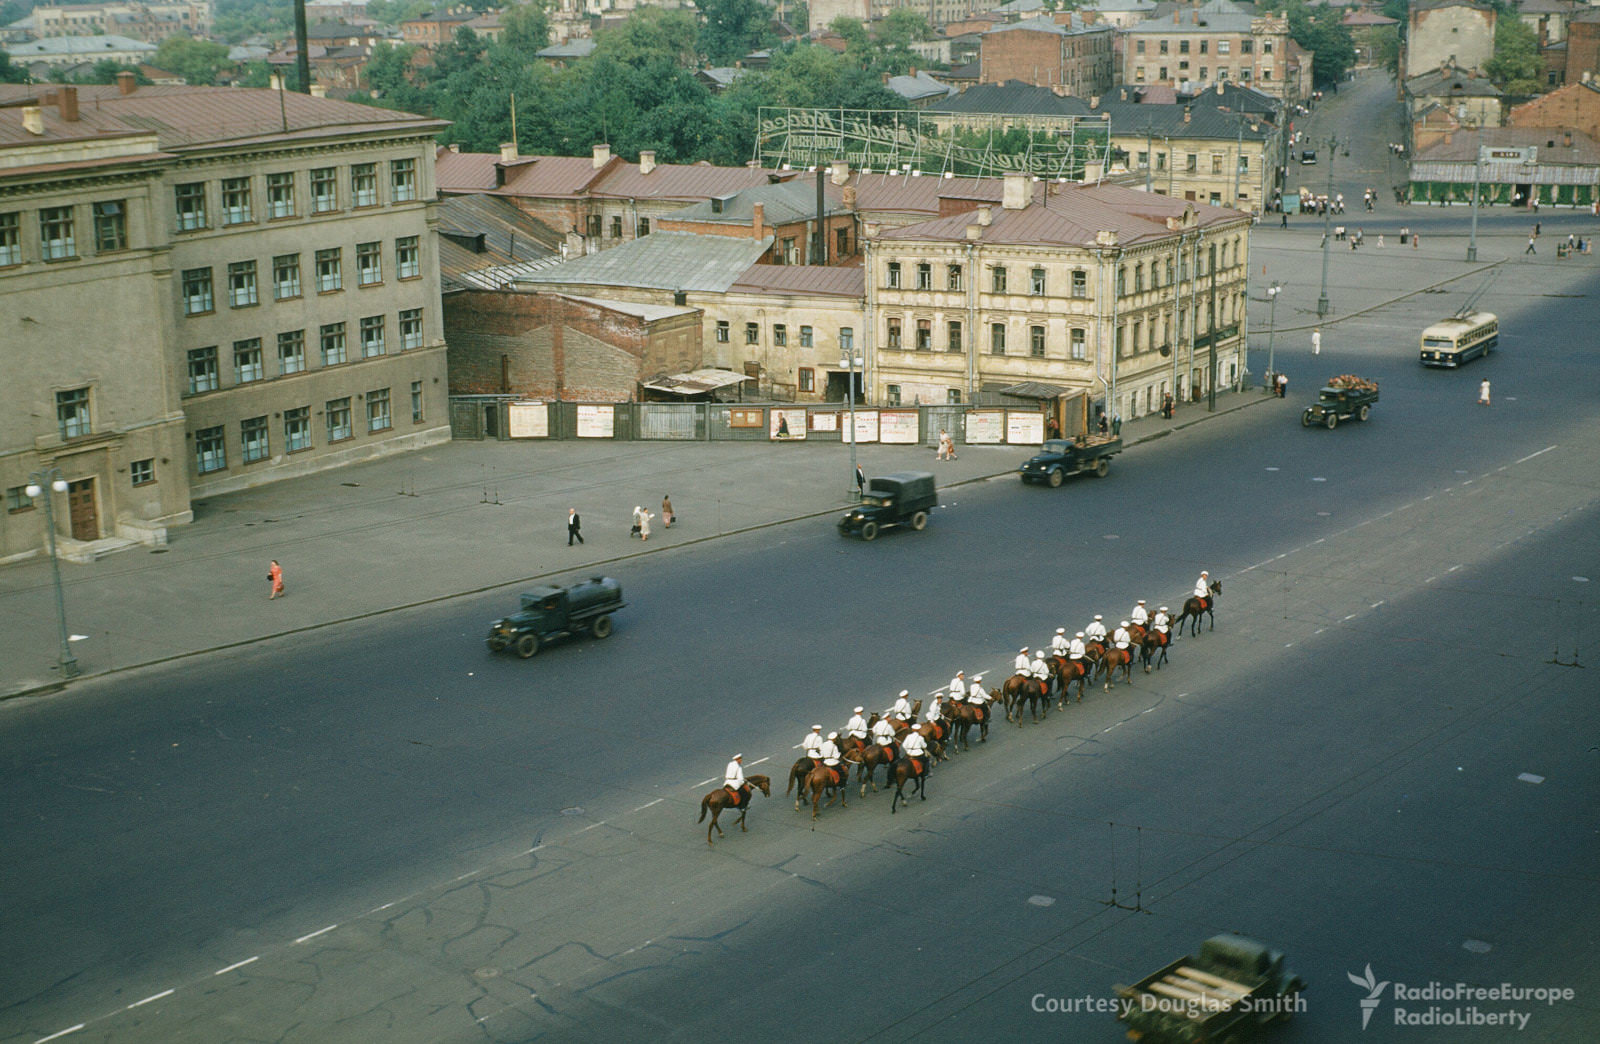 A line of horses take over the center lane, unknown location.